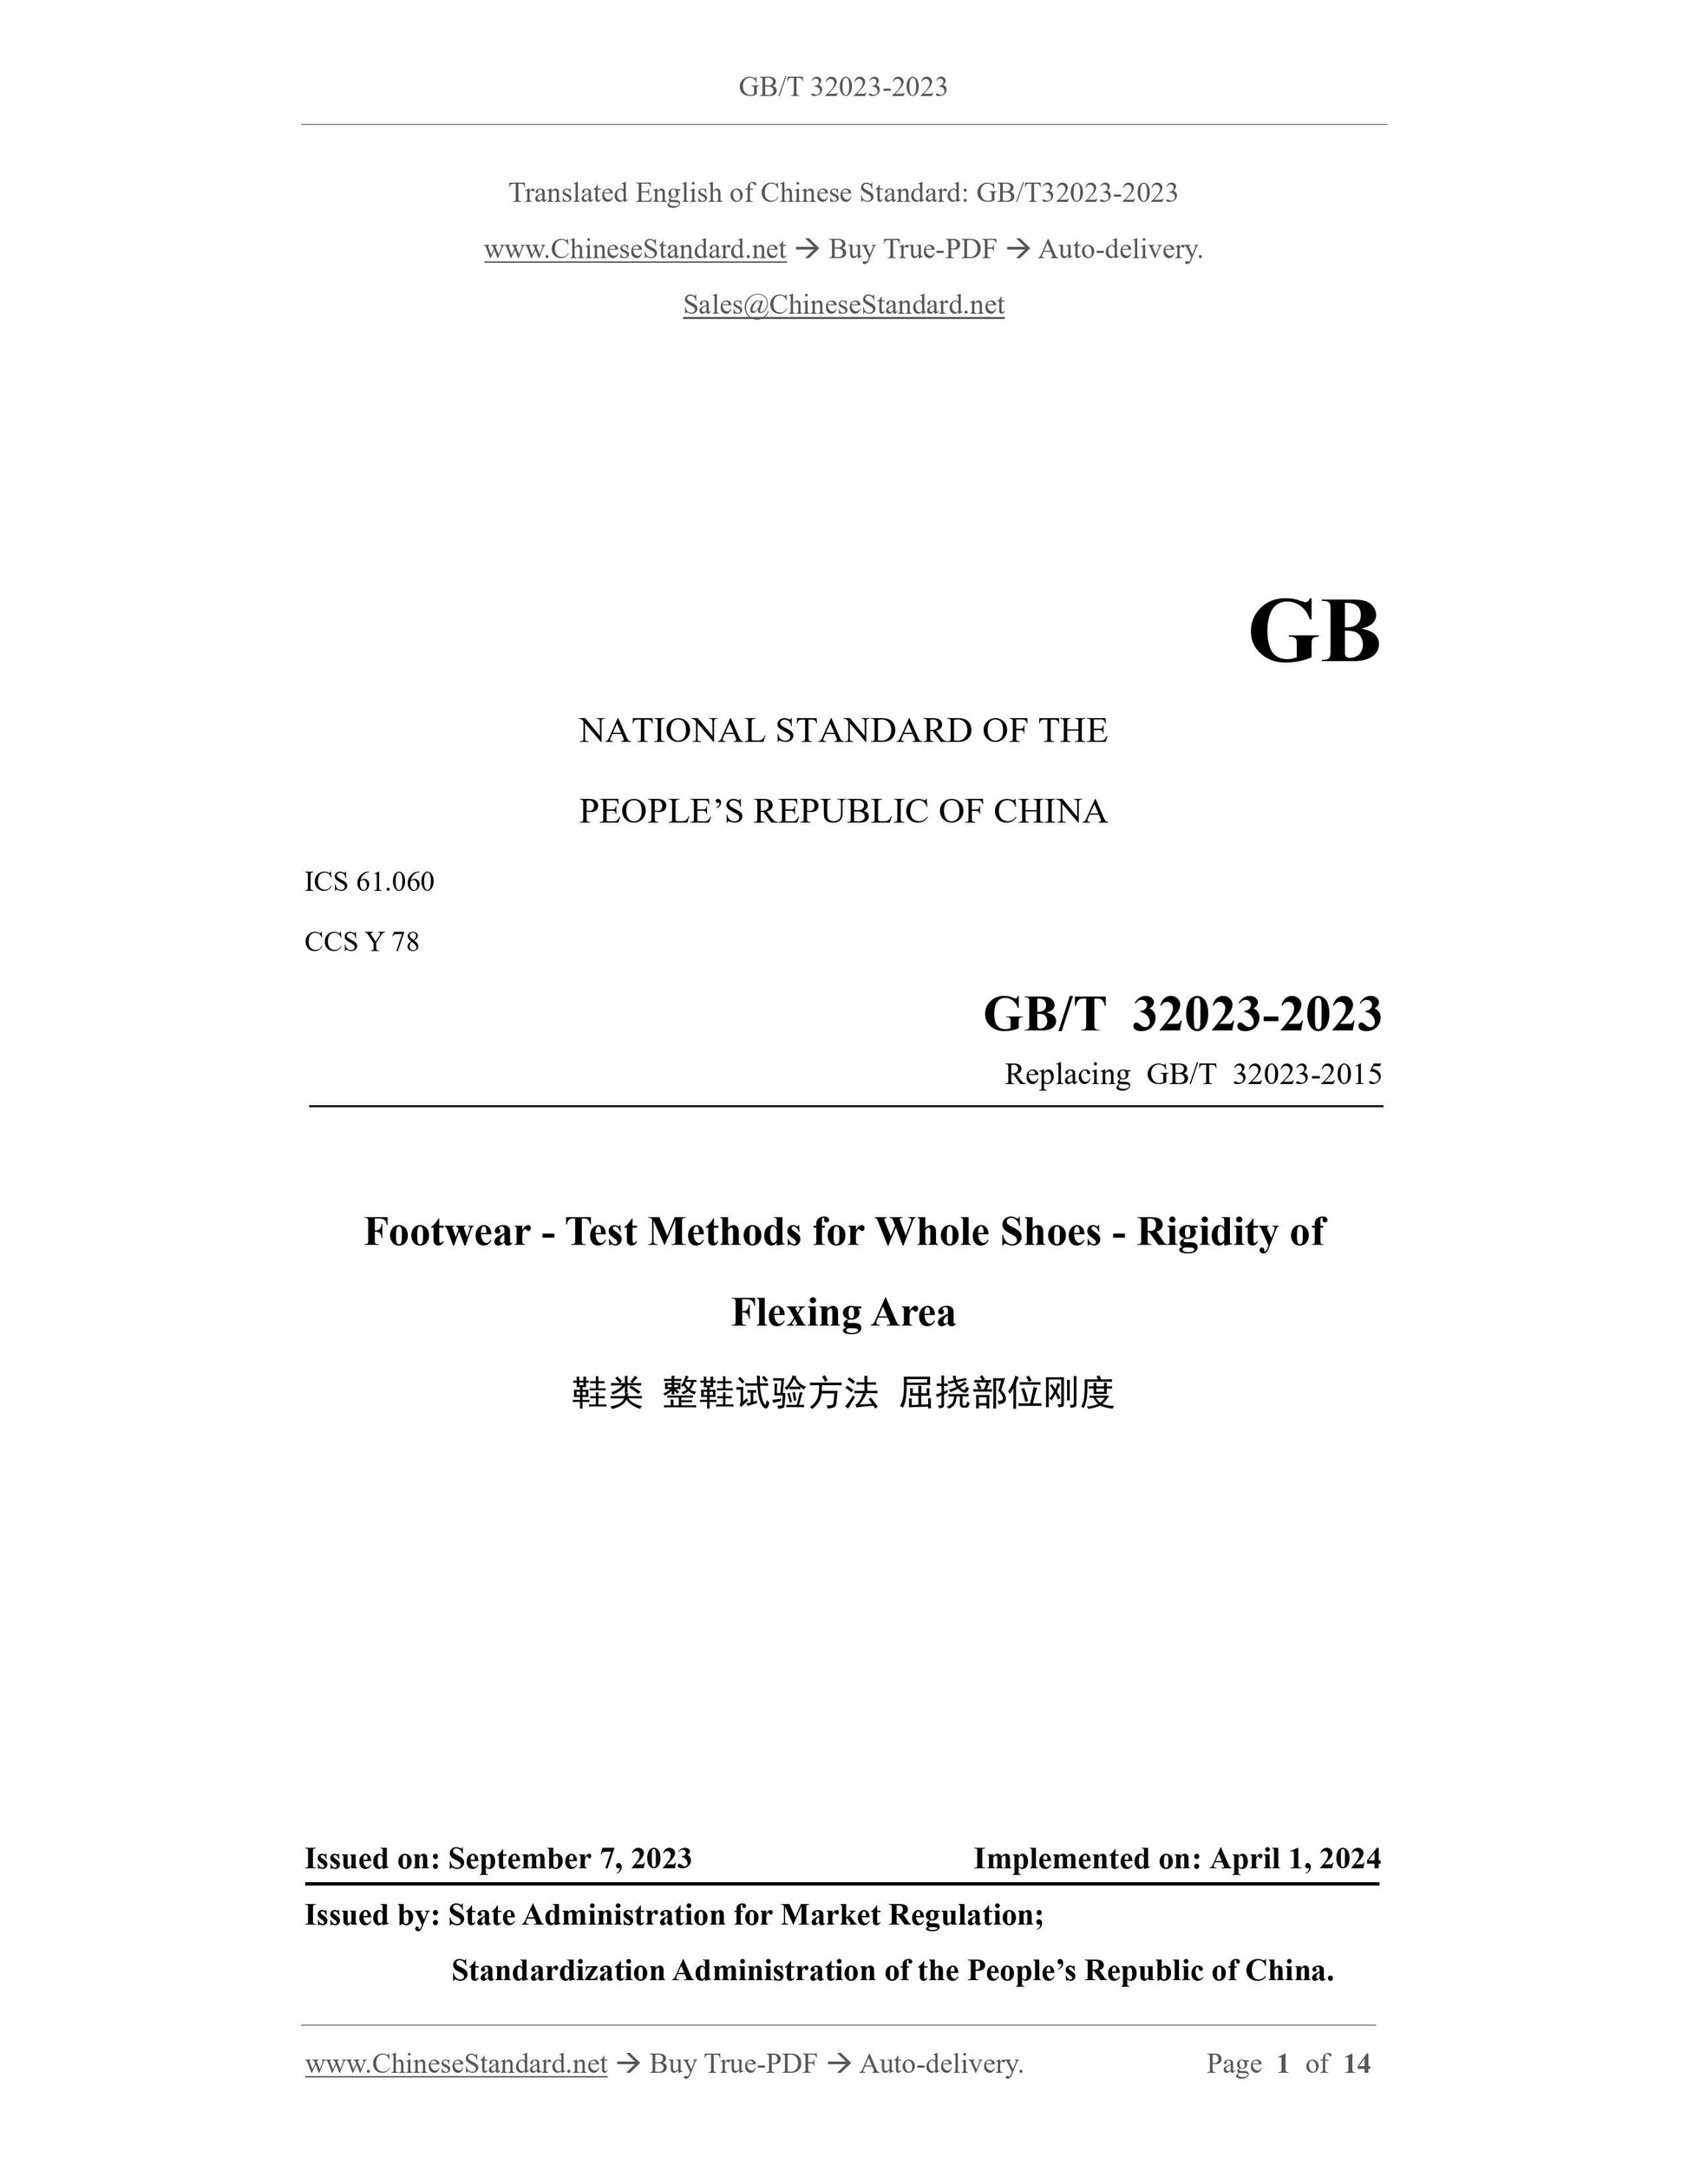 GB/T 32023-2023 Page 1